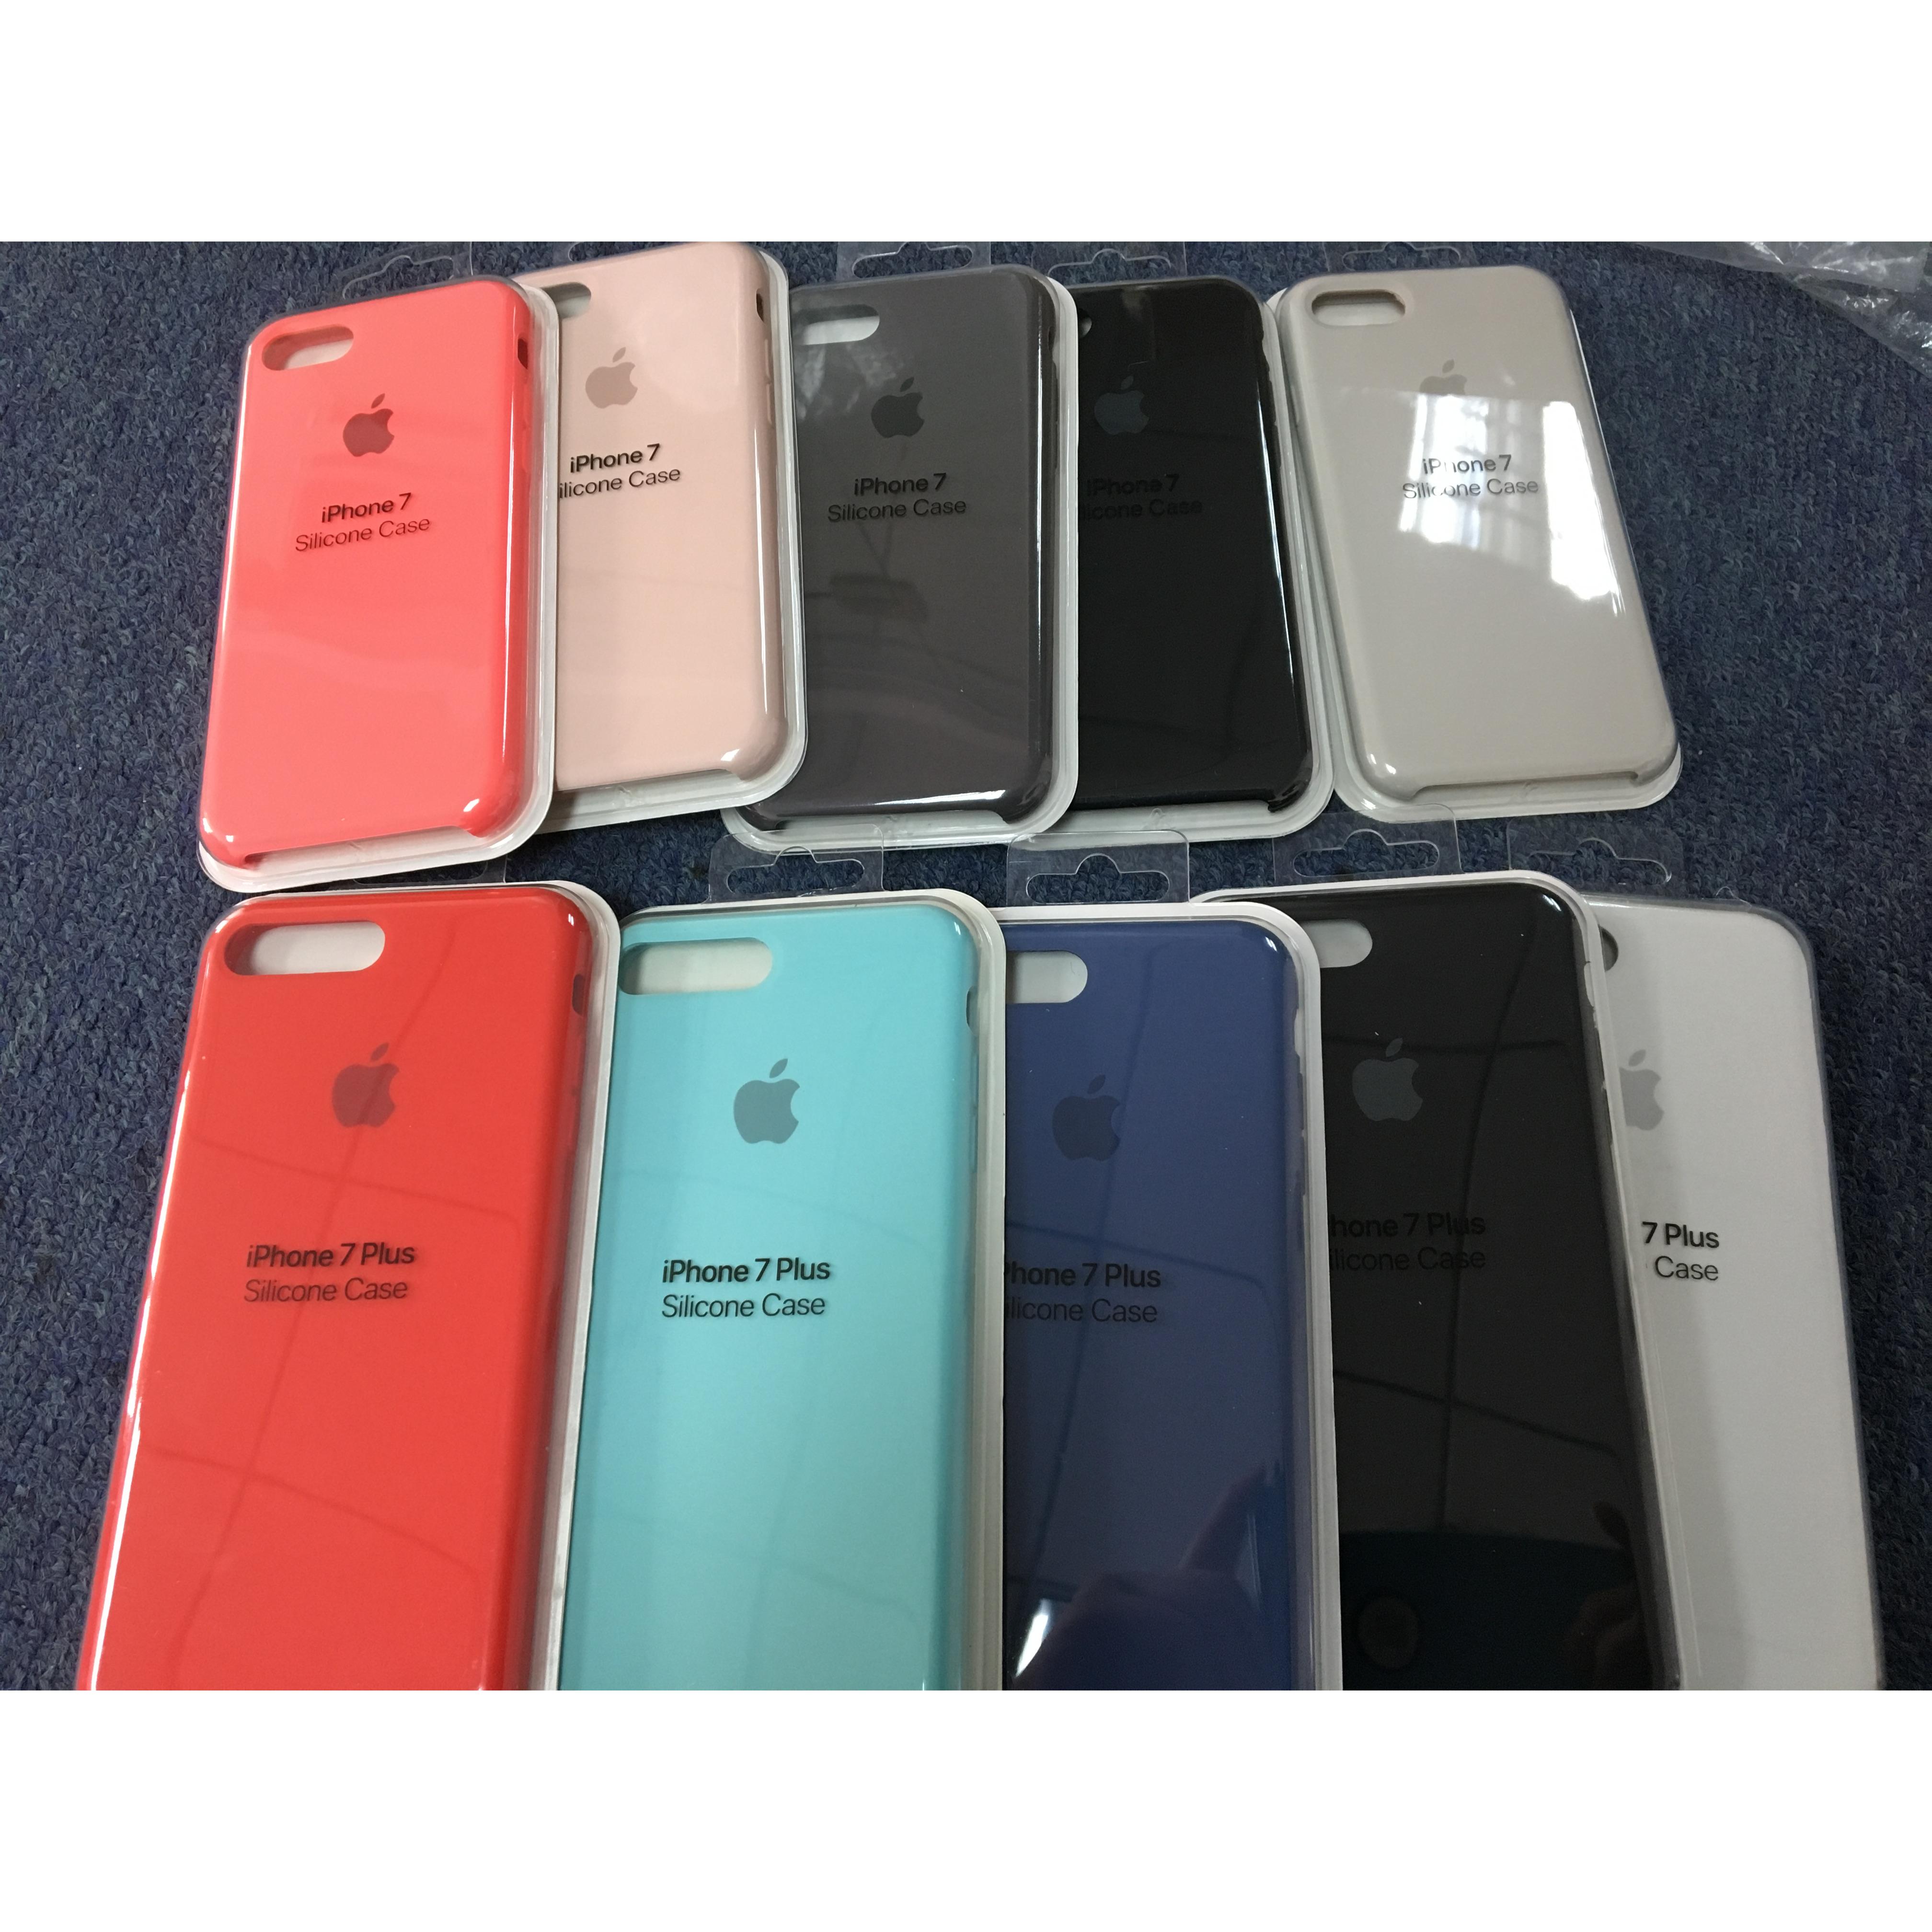 Apple Iphone Silicone Covers Wholesale Suppliers